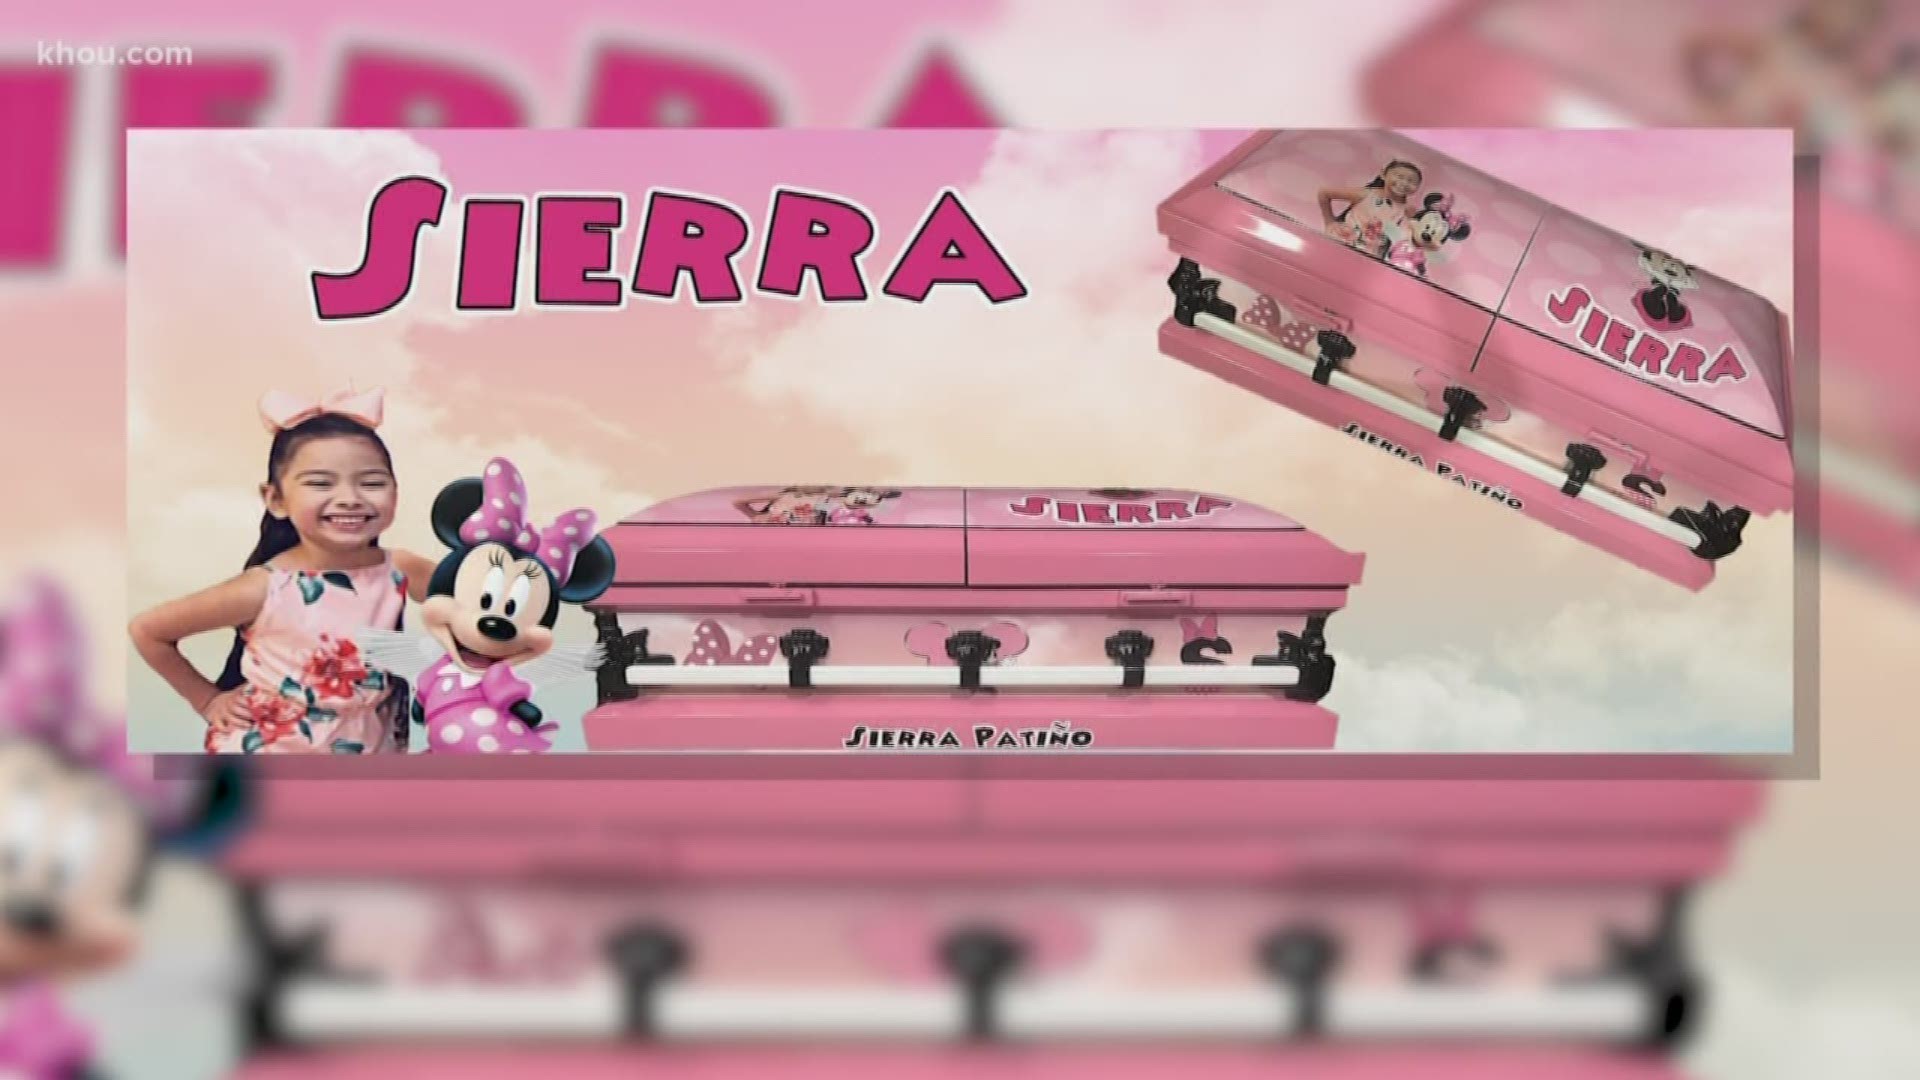 A Texas man who has earned nationwide attention for donating custom-made caskets to grieving families made one for 5-year-old Sierra Patino, the little girl who's body was hid in a bedroom closet.